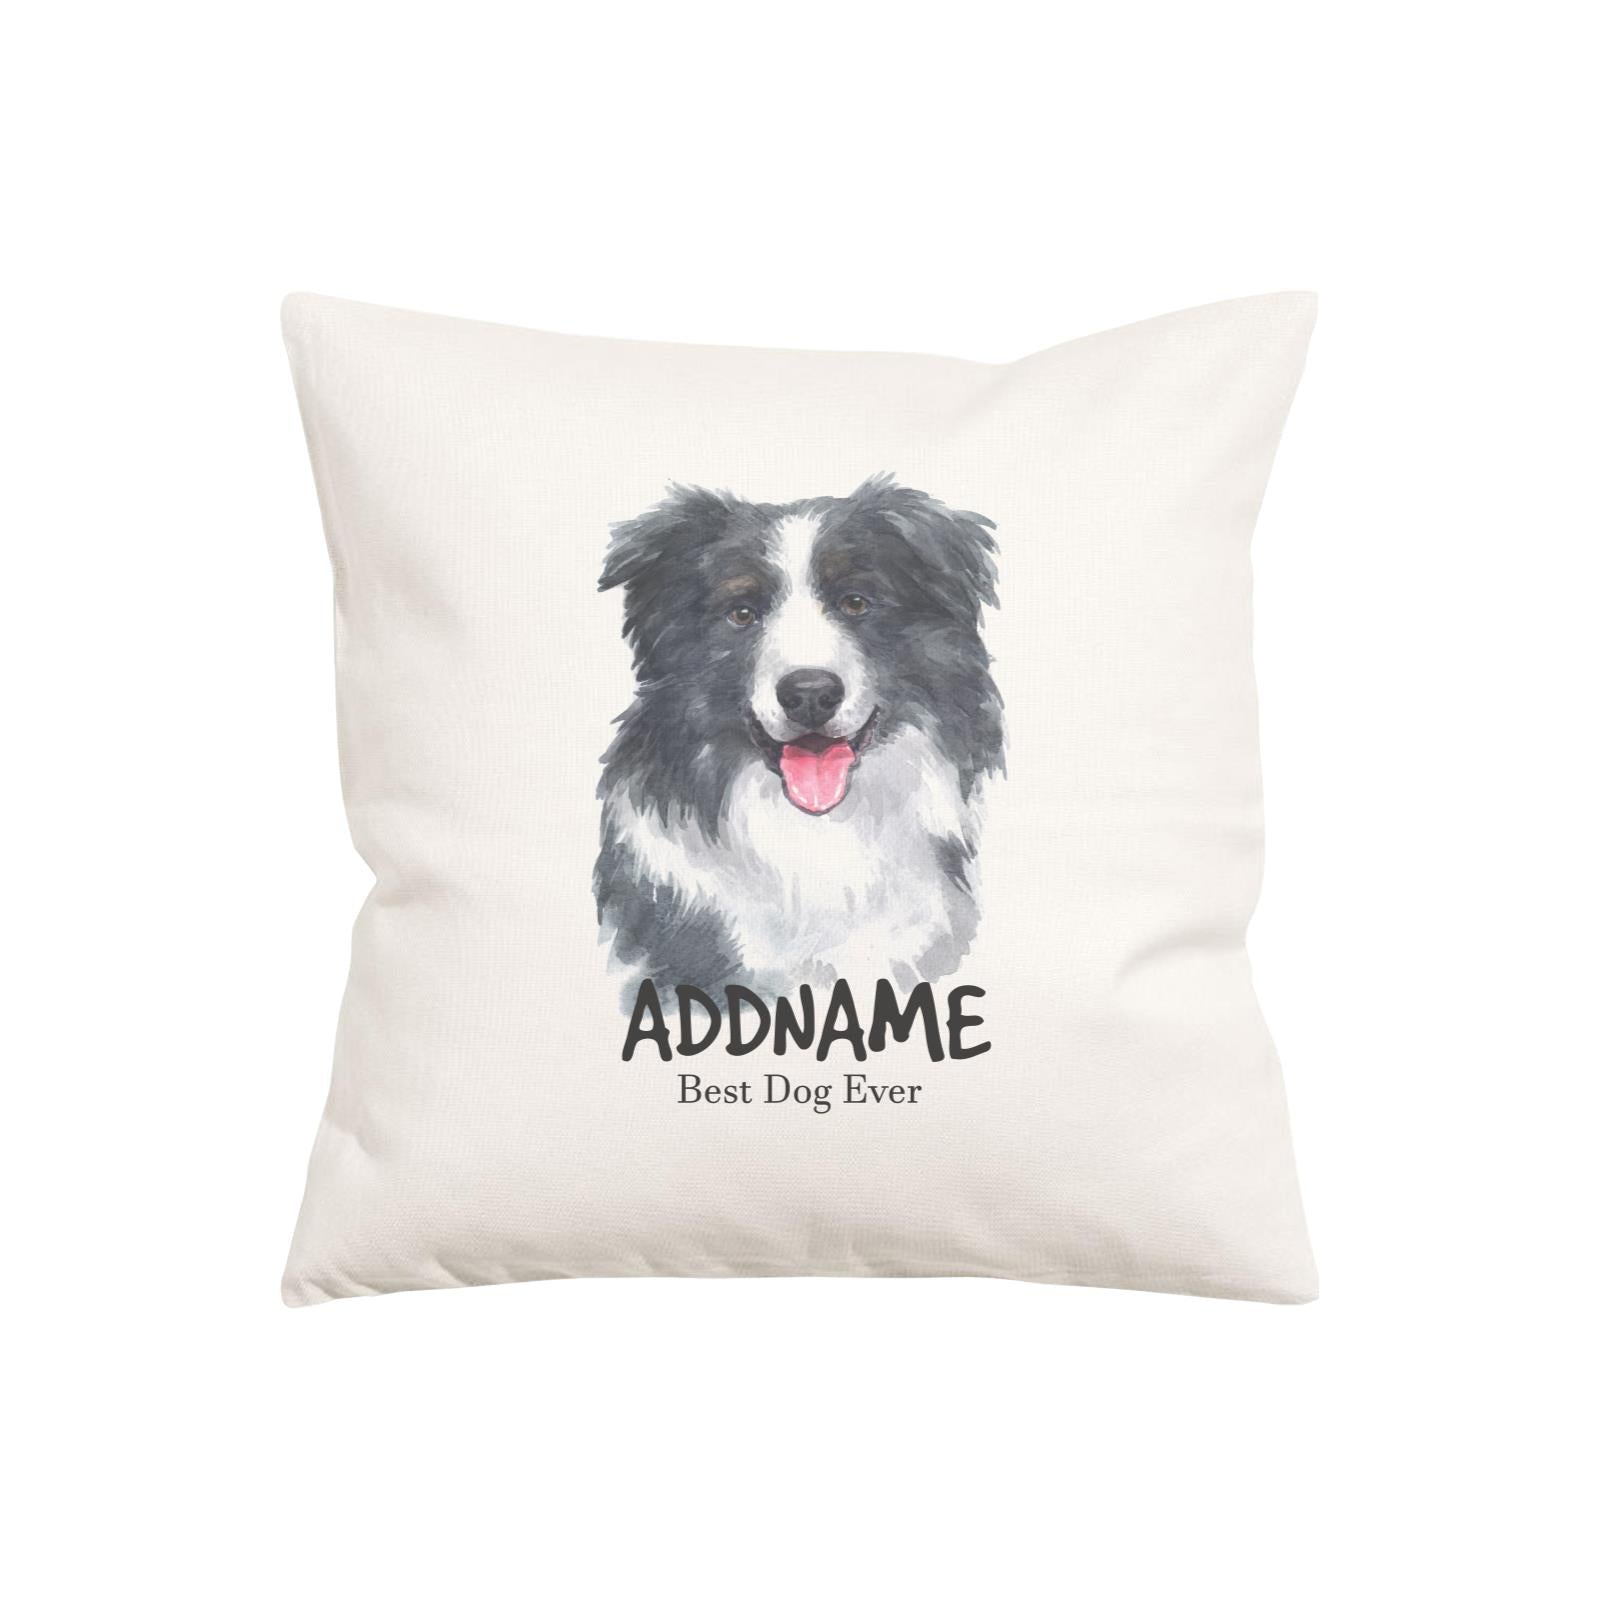 Watercolor Dog Series Border Collie Smile Best Dog Ever Addname Pillow Cushion